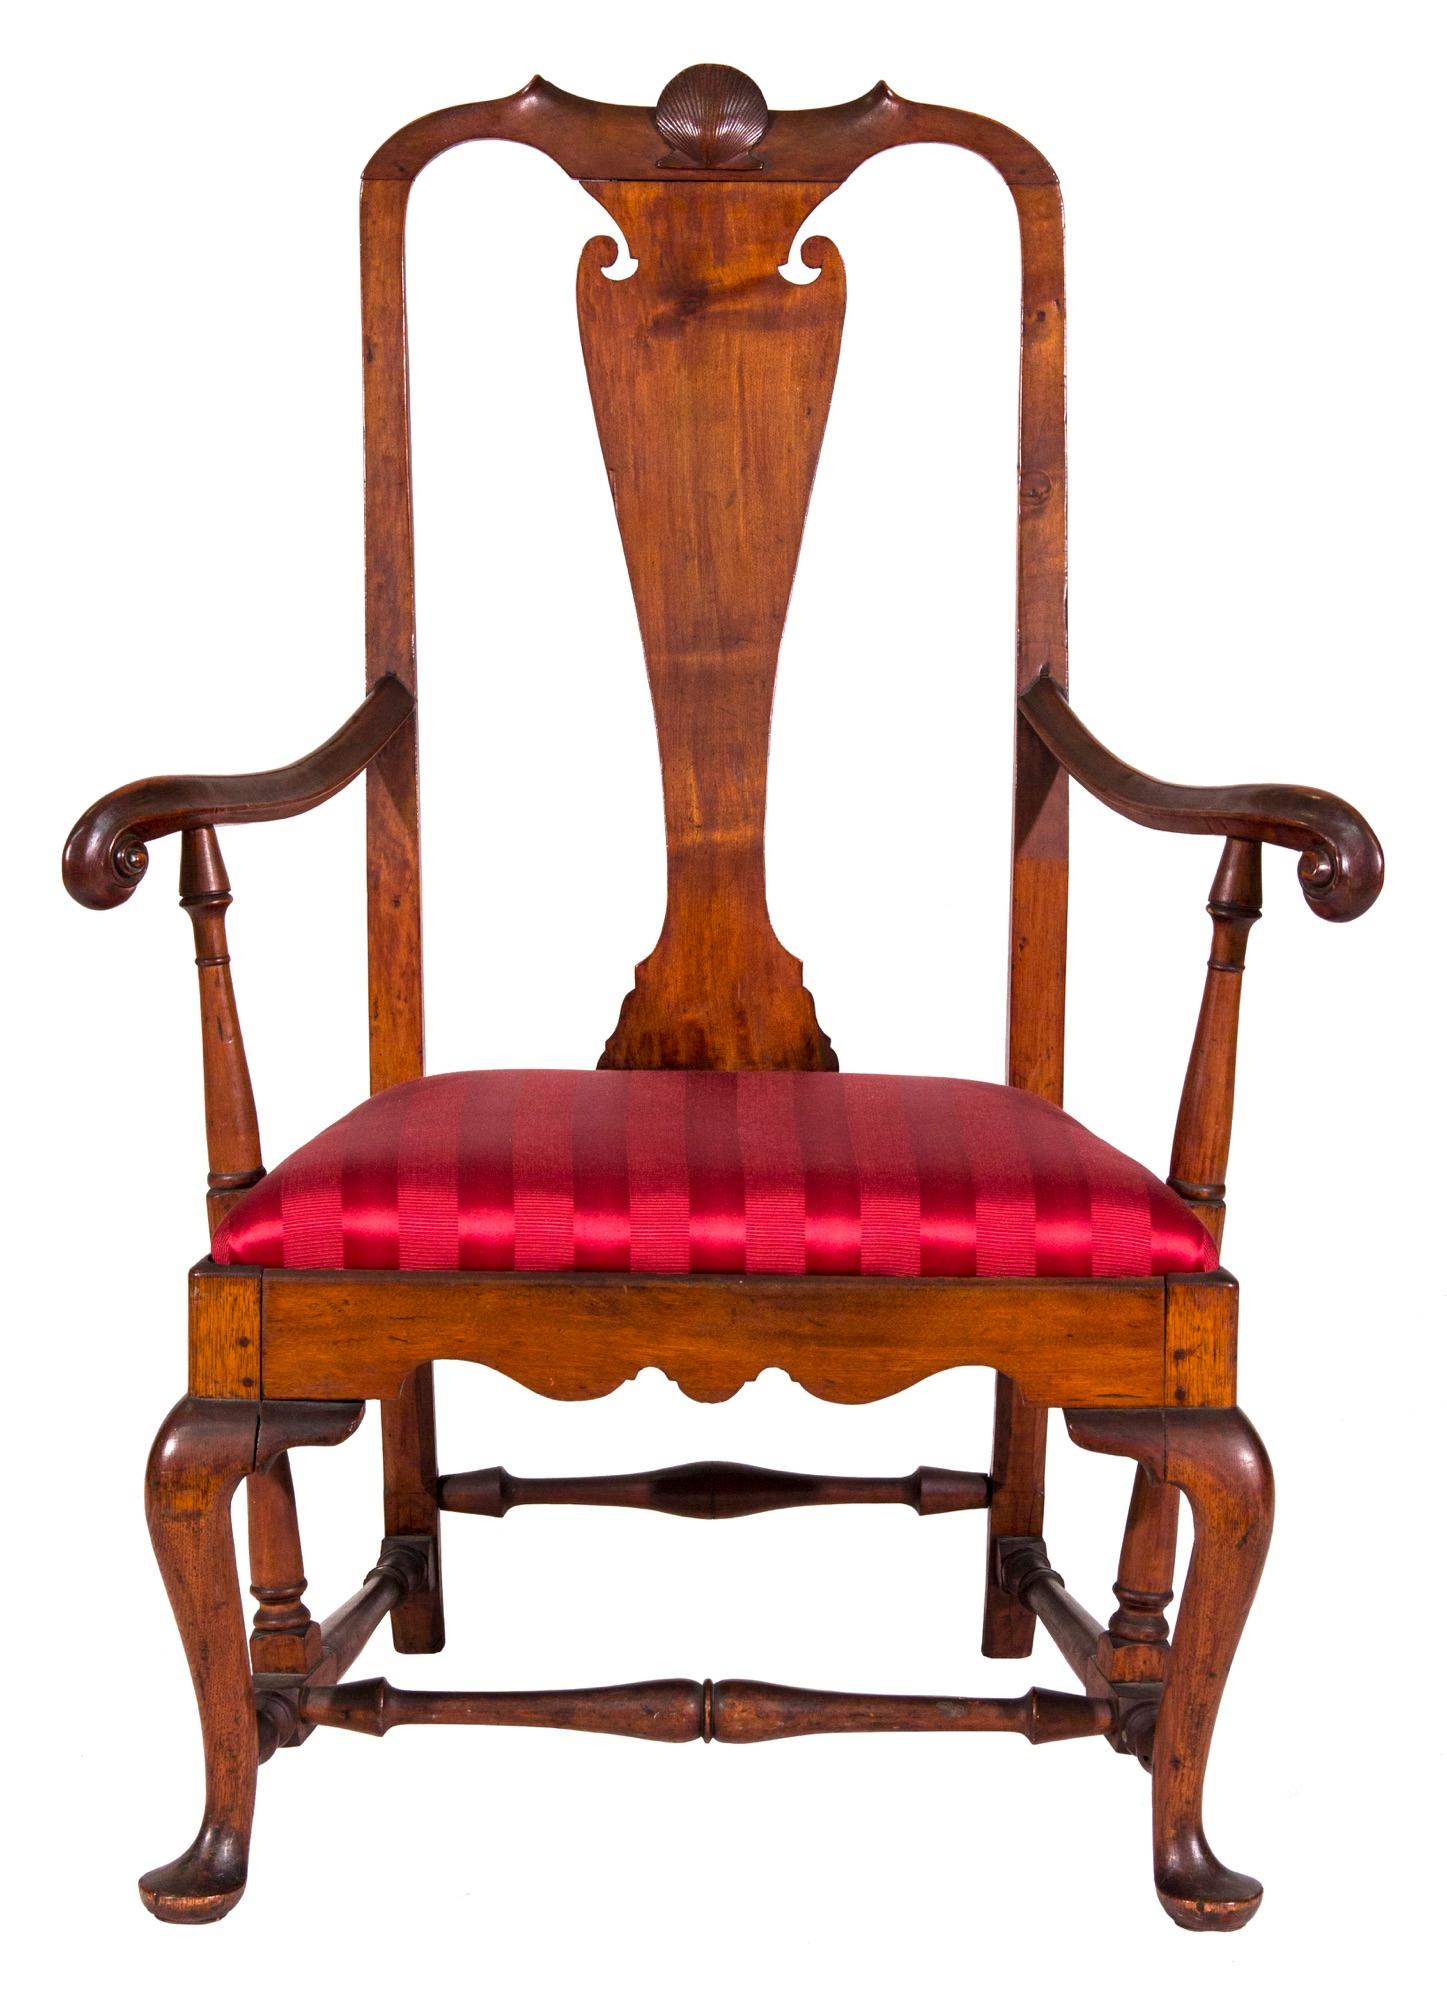 Provenance: Reputedly Benedict Arnold, and descended through the Ames Family of Newport, RI, circa 1730.

This is a magnificent small armchair with a wonderful shell carved into the solid of the crest rail. Note the long, then tapering splat, and